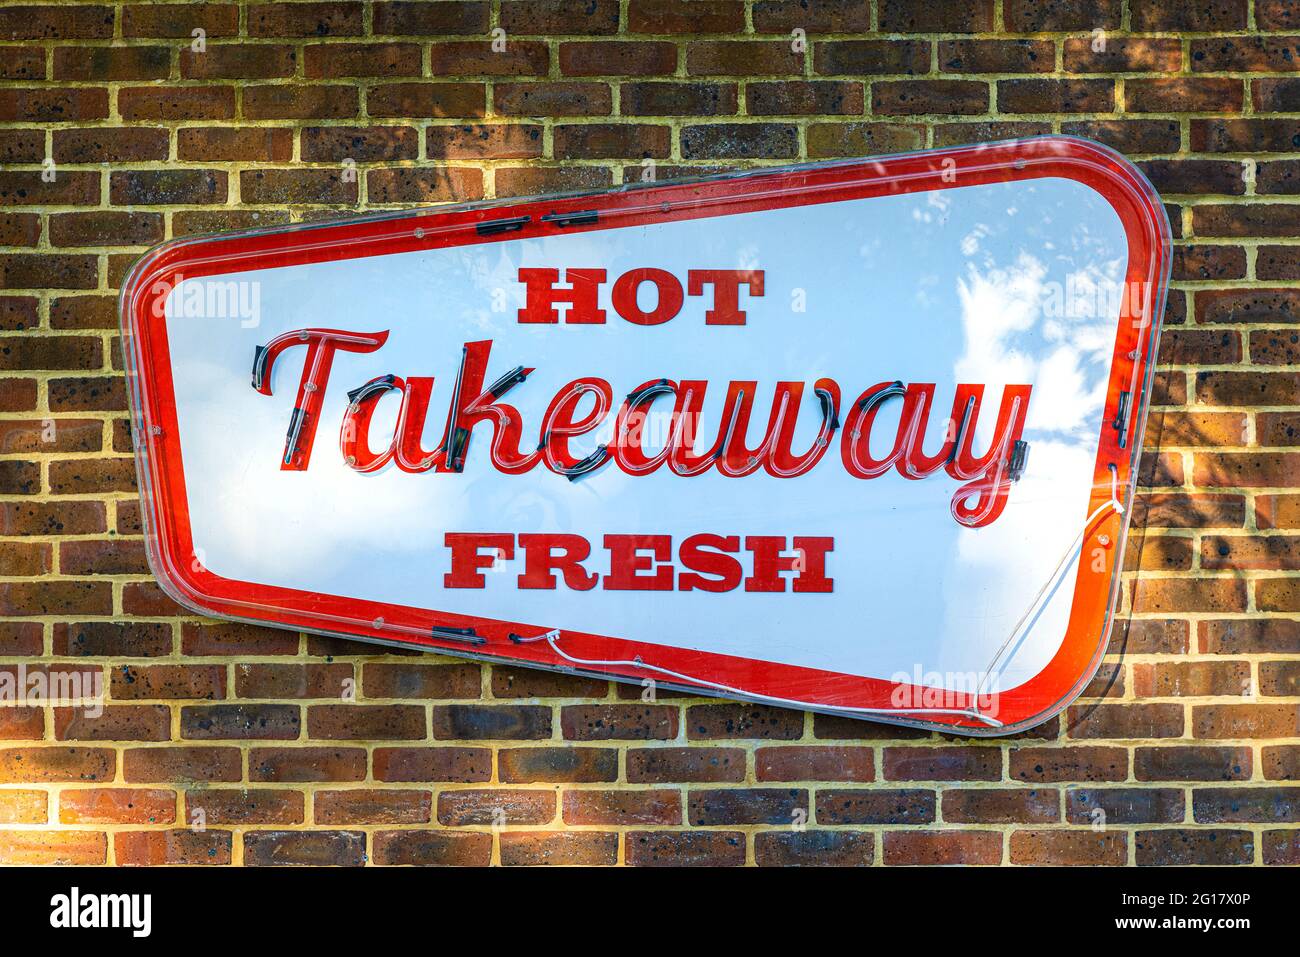 Hot Fresh Takeaway Food Sign on a brick wall Stock Photo